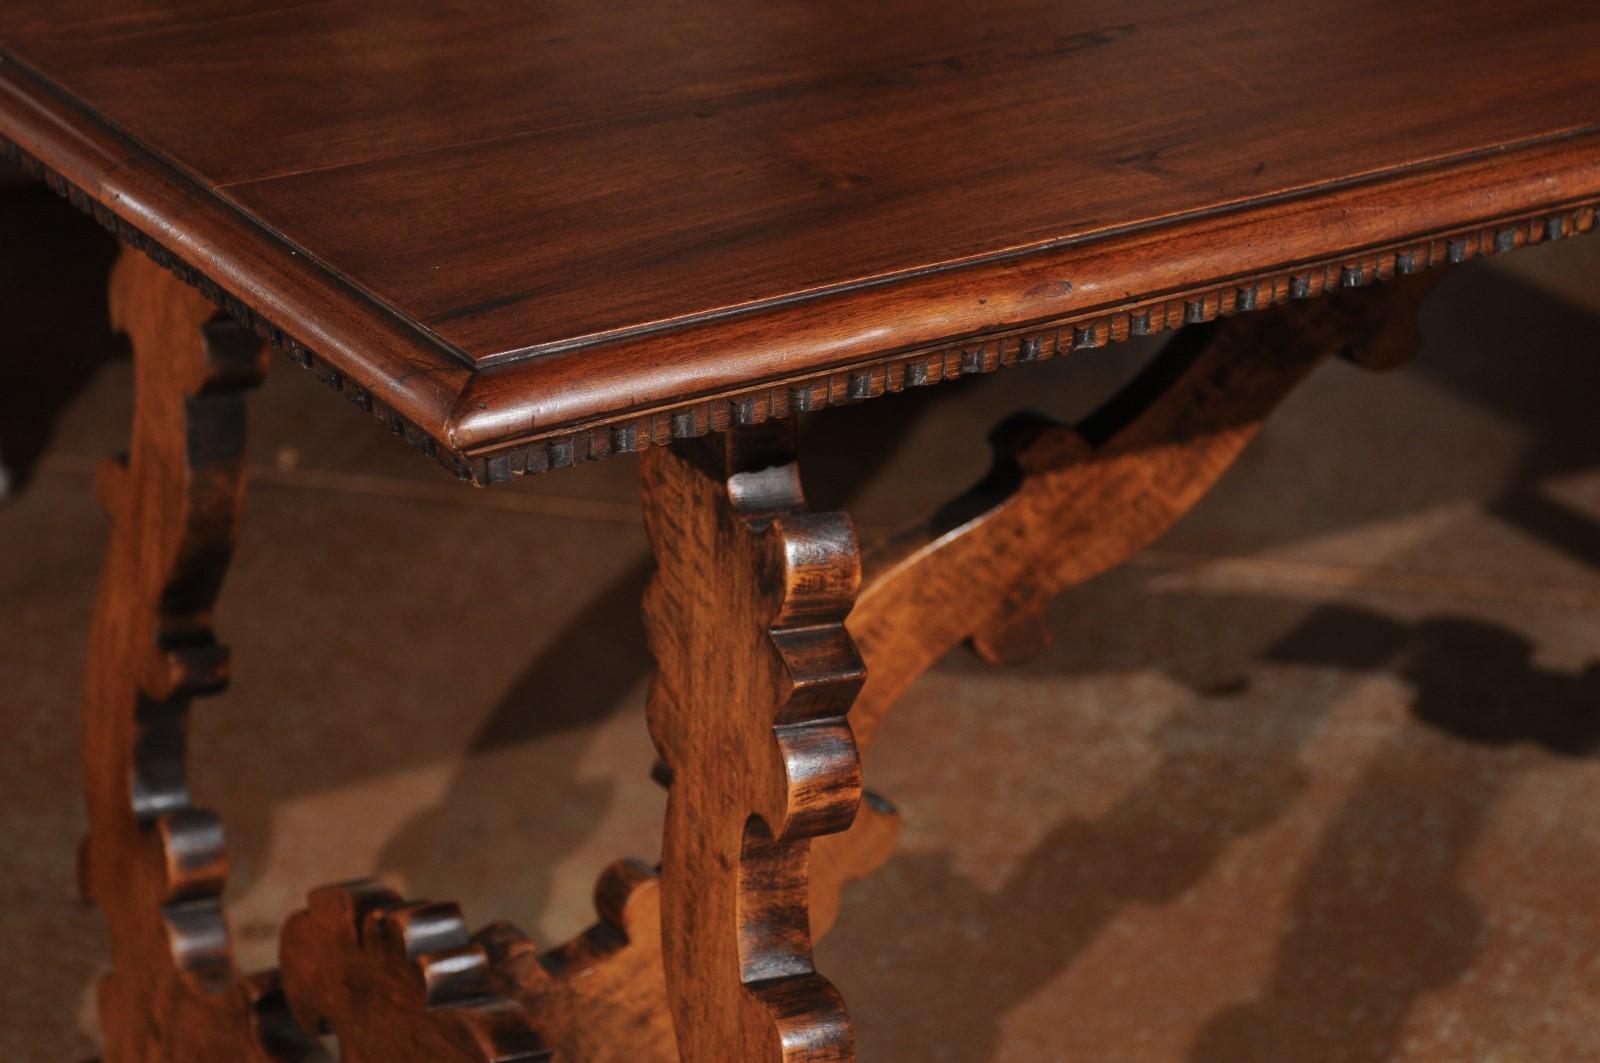 Spanish Baroque Style 19th Century Walnut Fratino Table with Carved Lyre Legs 6